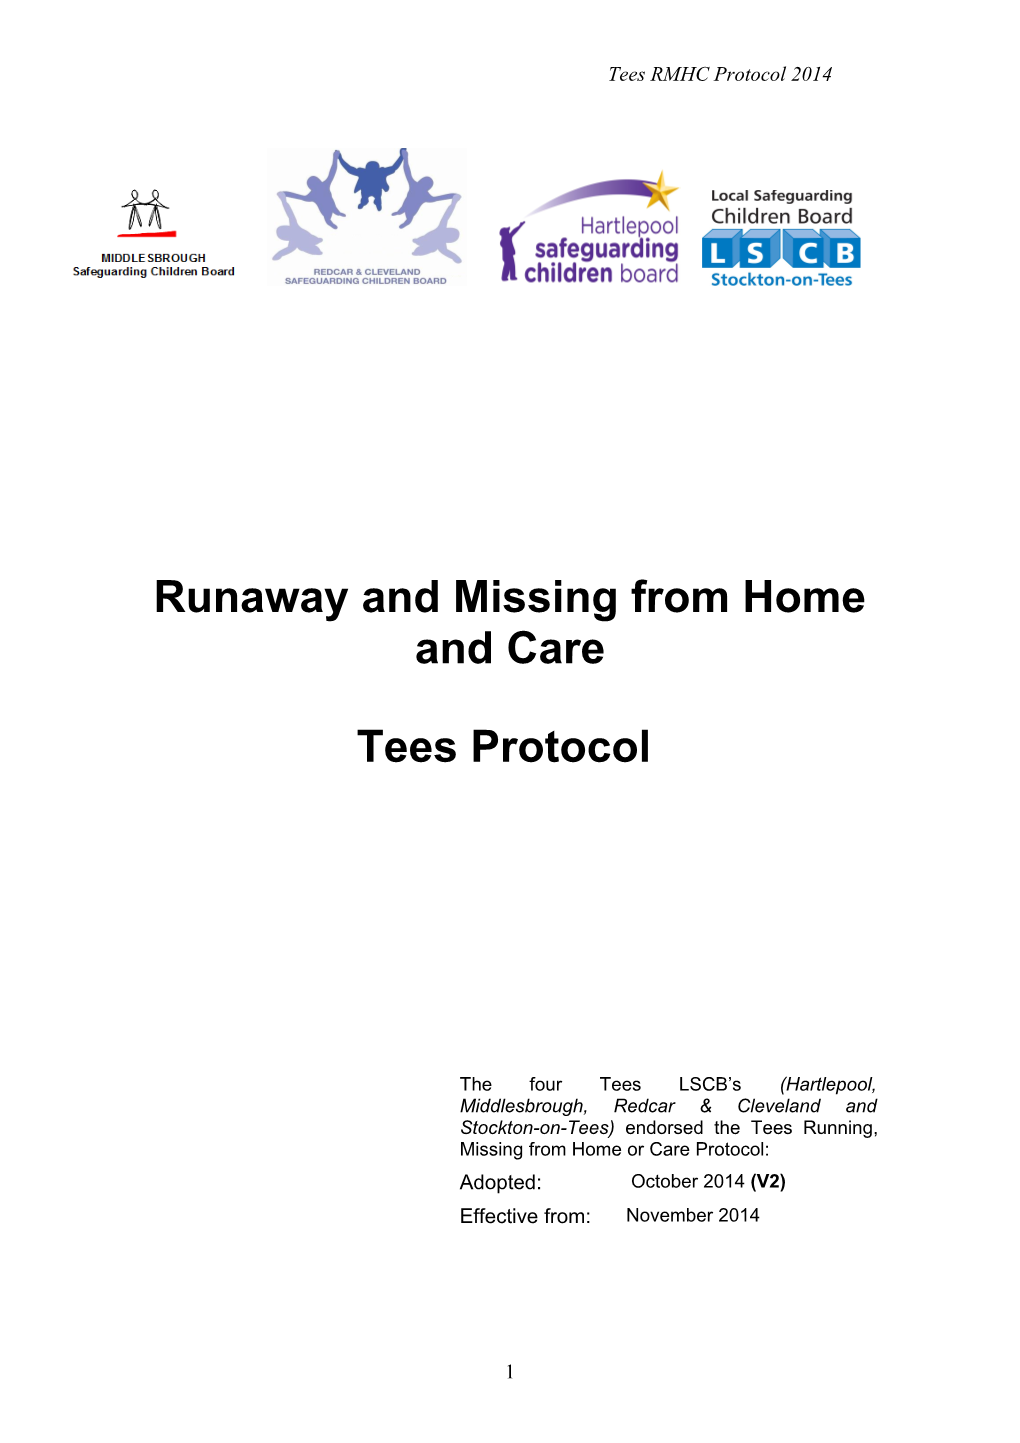 RUNNING MISSING from HOME & CARE PROTOCOL HEADINGS (Draft) s1